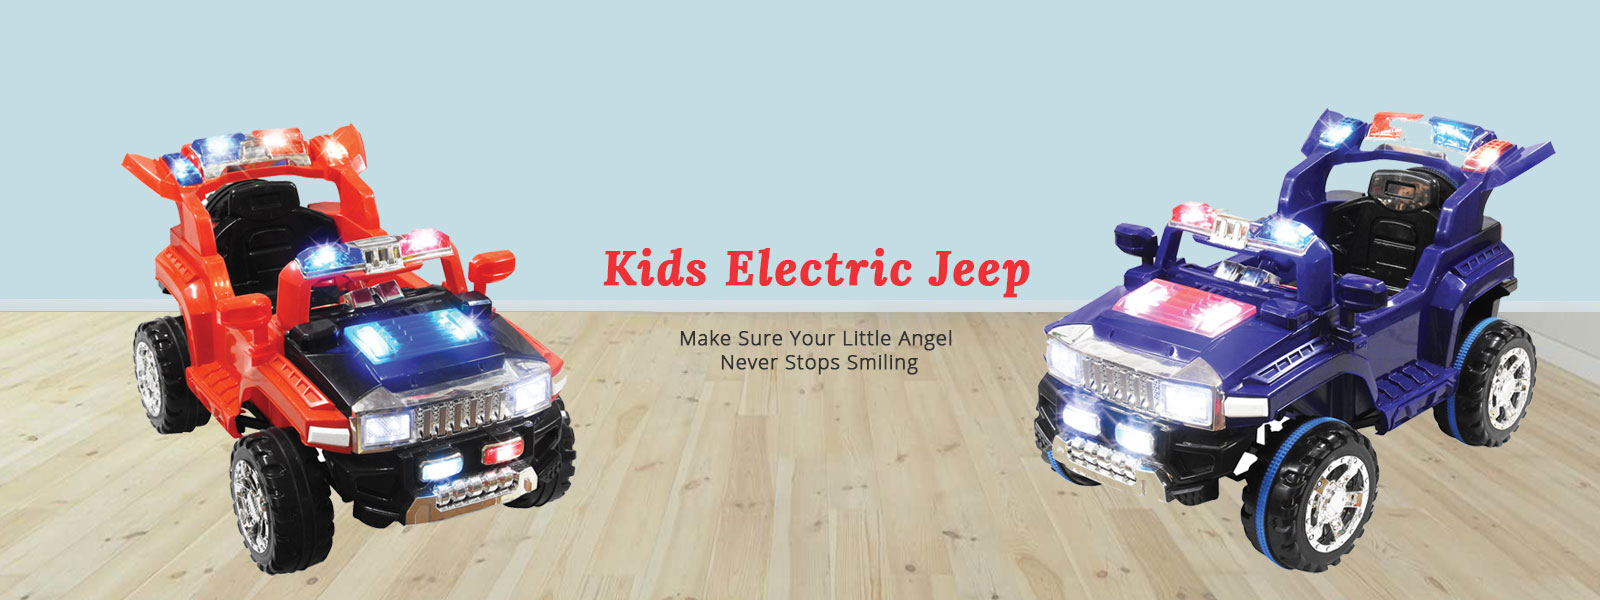 Kids Electric Jeep Manufacturers in Ulhasnagar